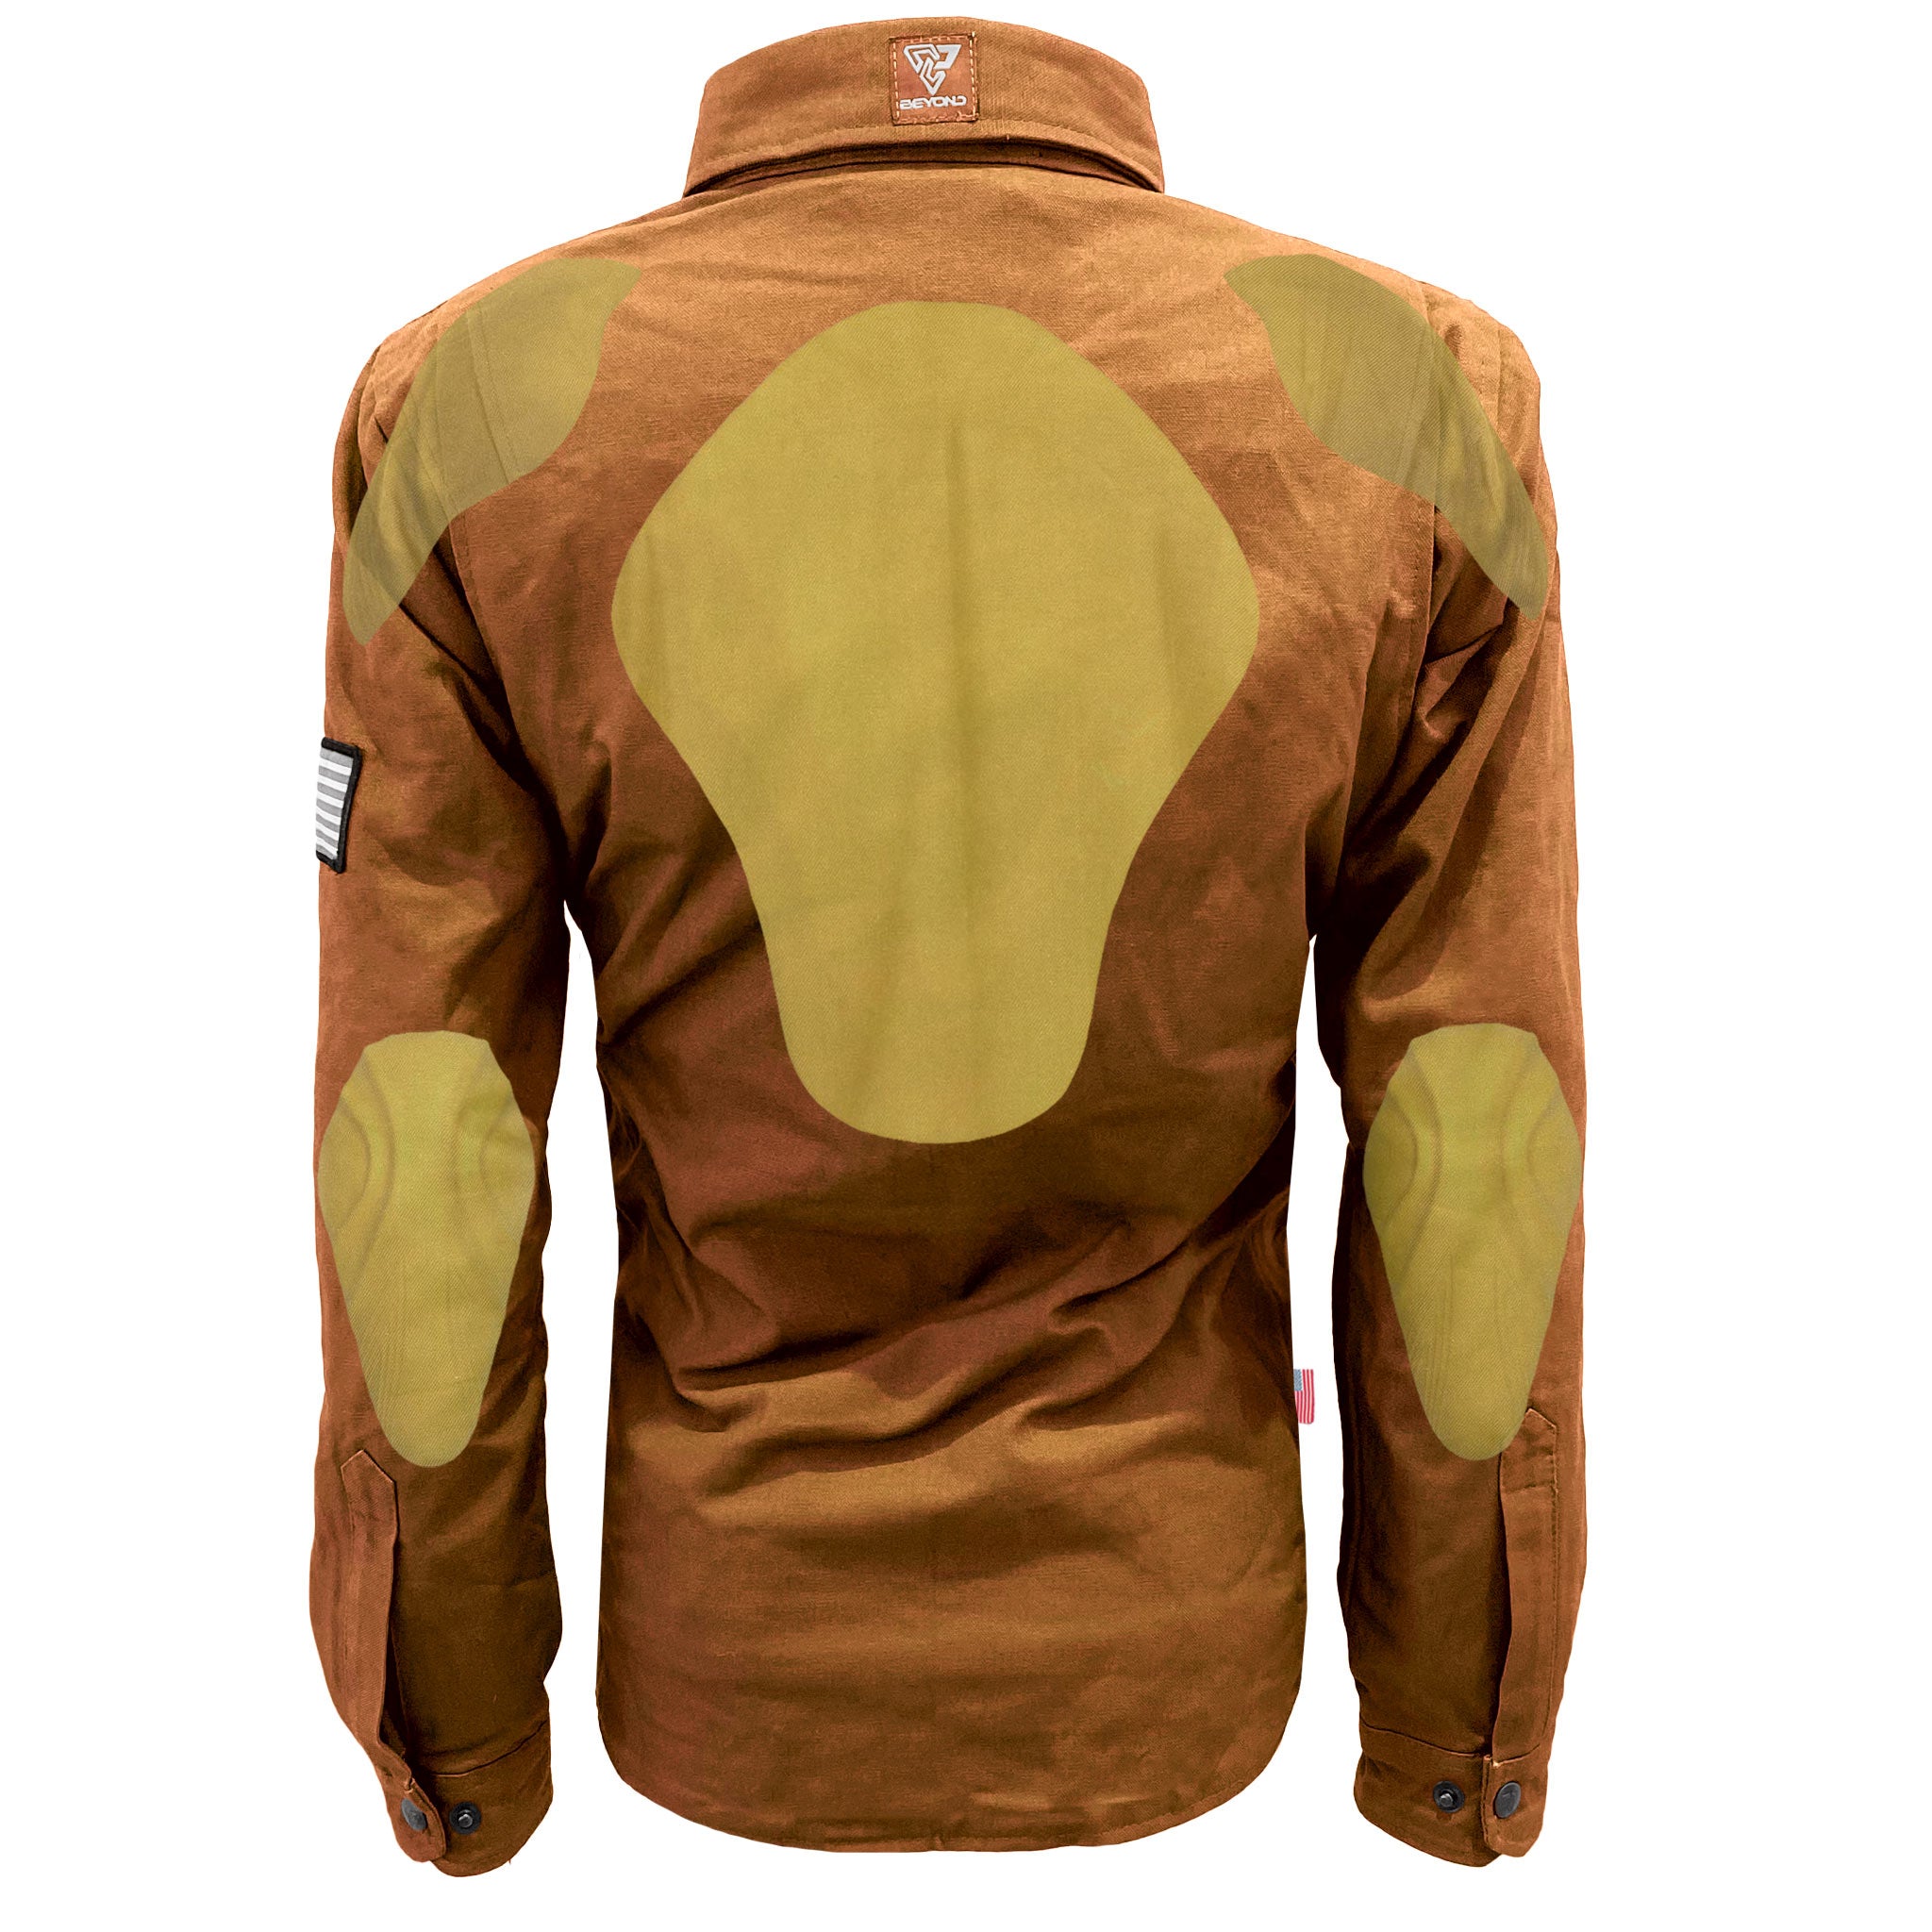 Protective Canvas Jacket for Women - Light Brown with Pads